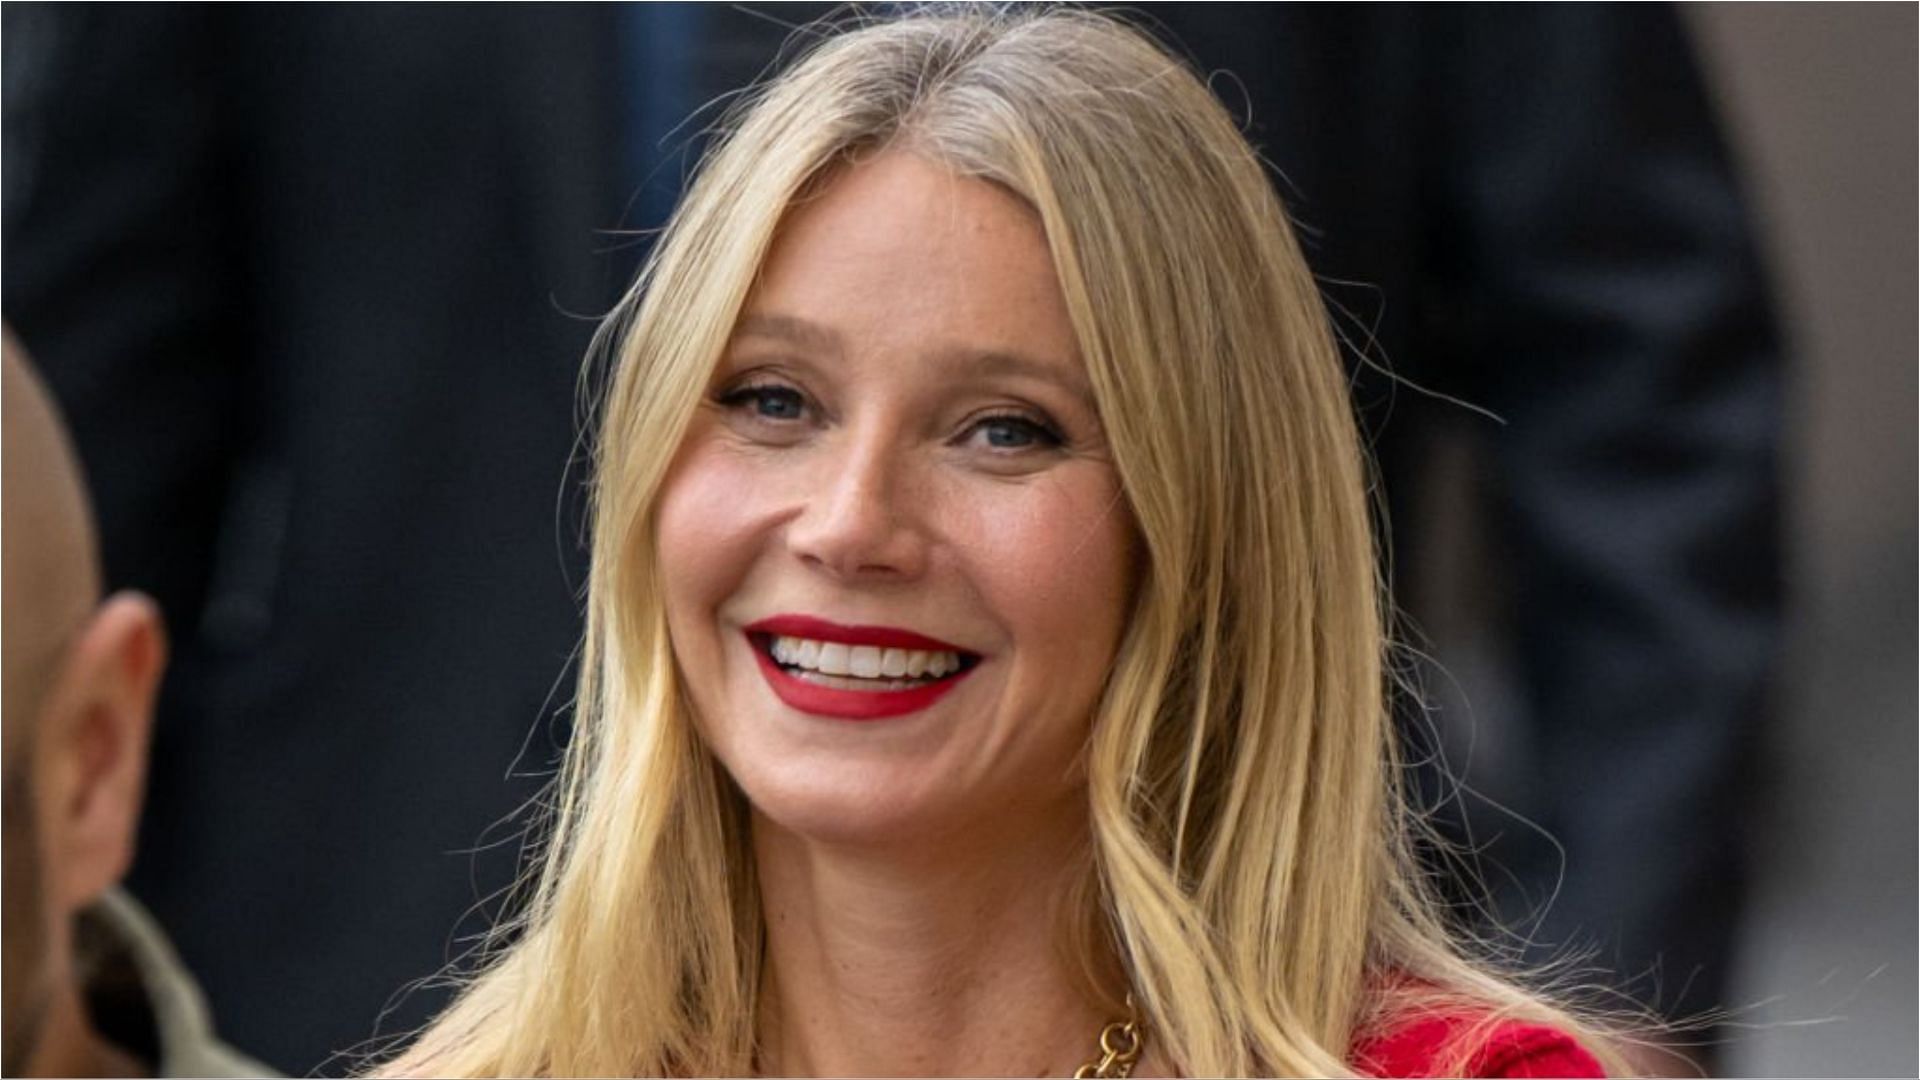 Gwyneth Paltrow was sued for reportedly hitting an individual while skiing (Image via RB/Bauer-Griffin/Getty Images)